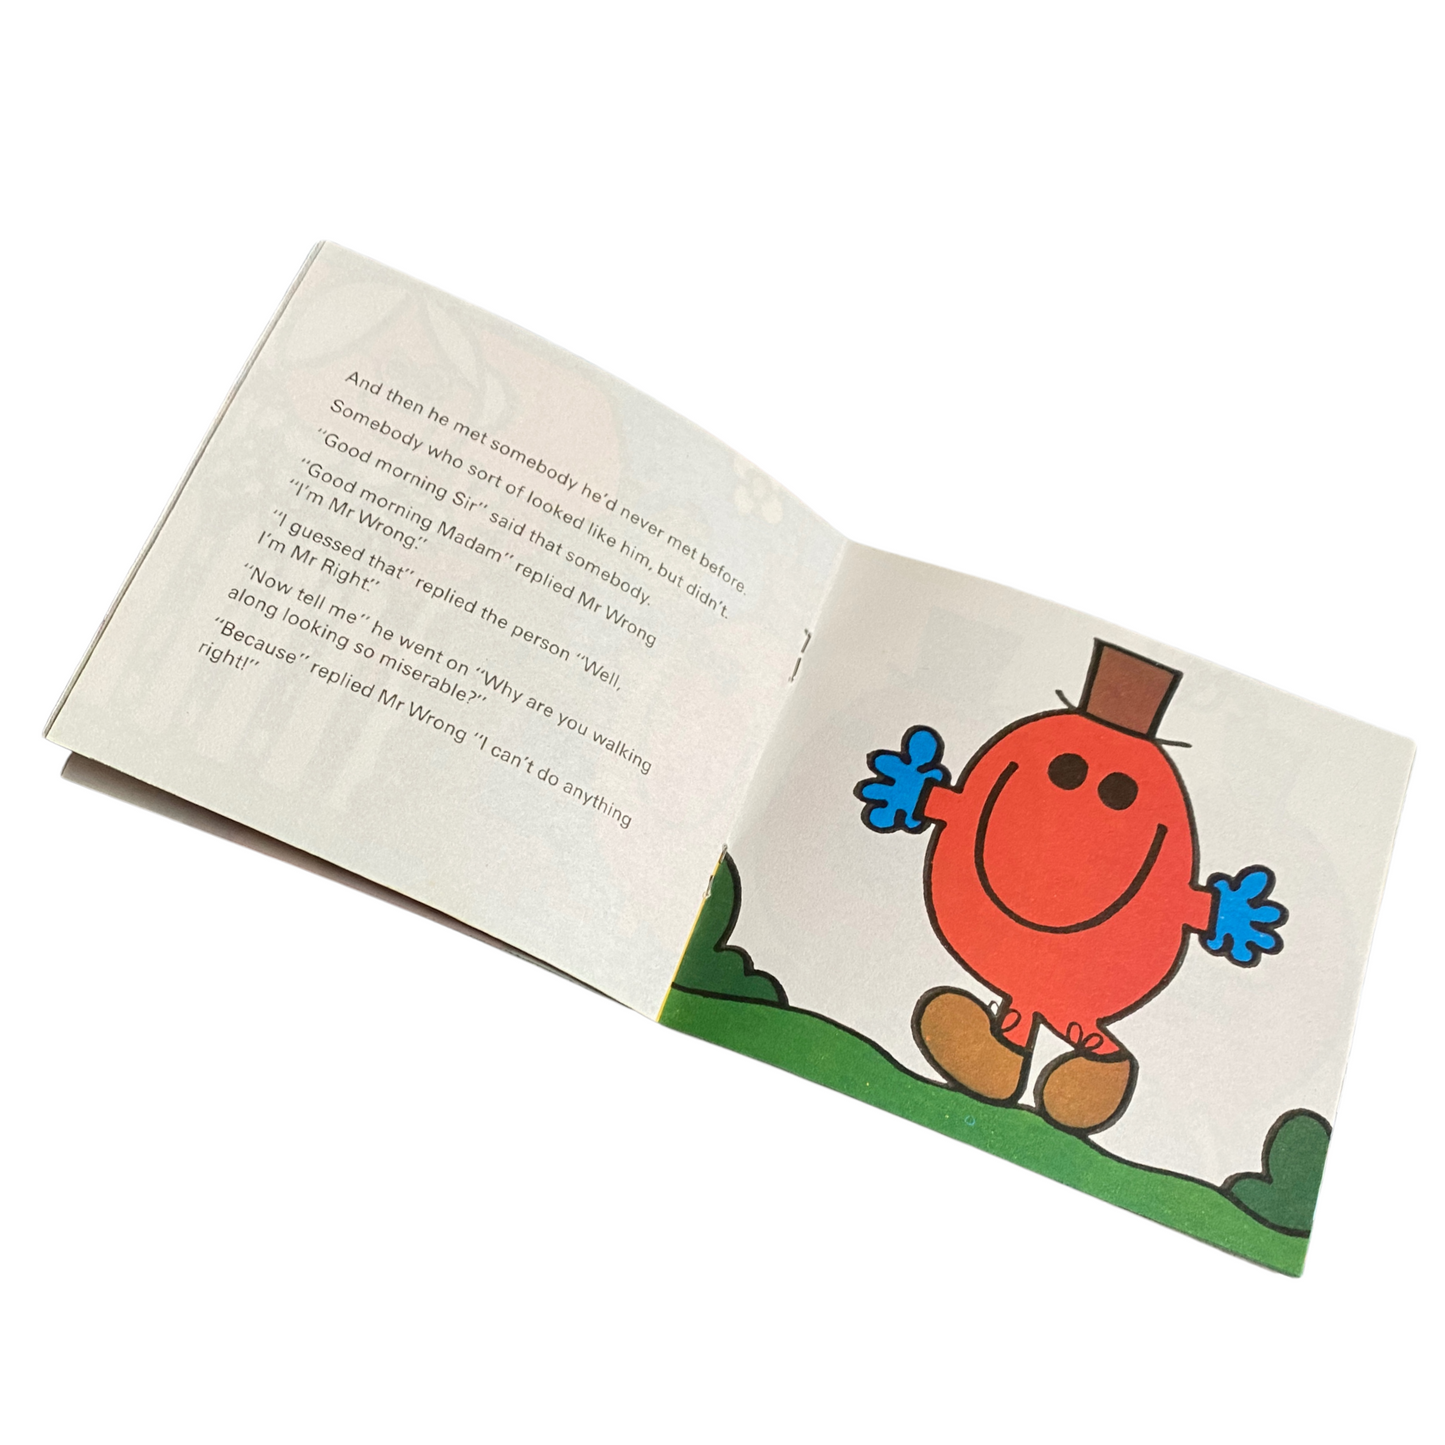 Retro Mr. Men Book -  Mr Wrong  - 1978    Edition  by Roger Hargreaves